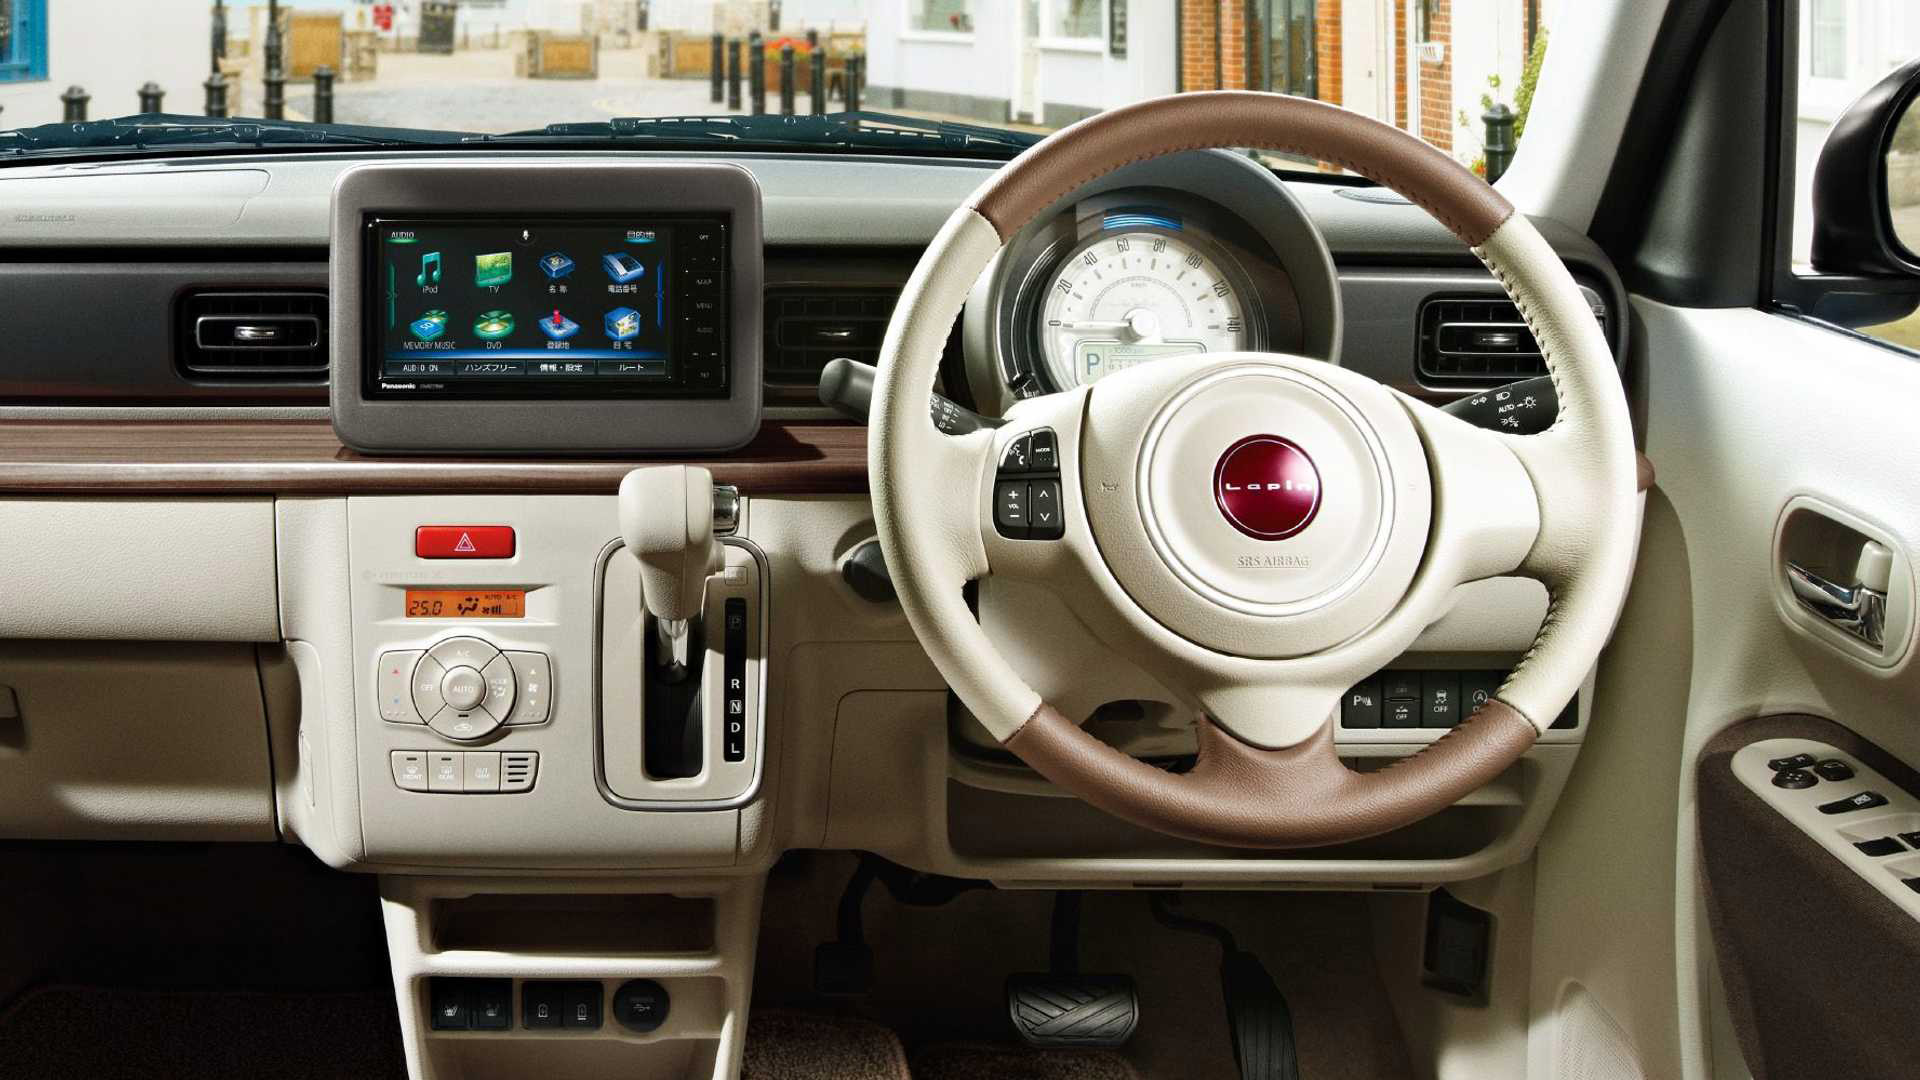 The dashboard of the Suzuki Alto Lapin LC is very reminiscent of 60 years ago, especially because of the colors chosen for both the exterior and the interior upholstery.